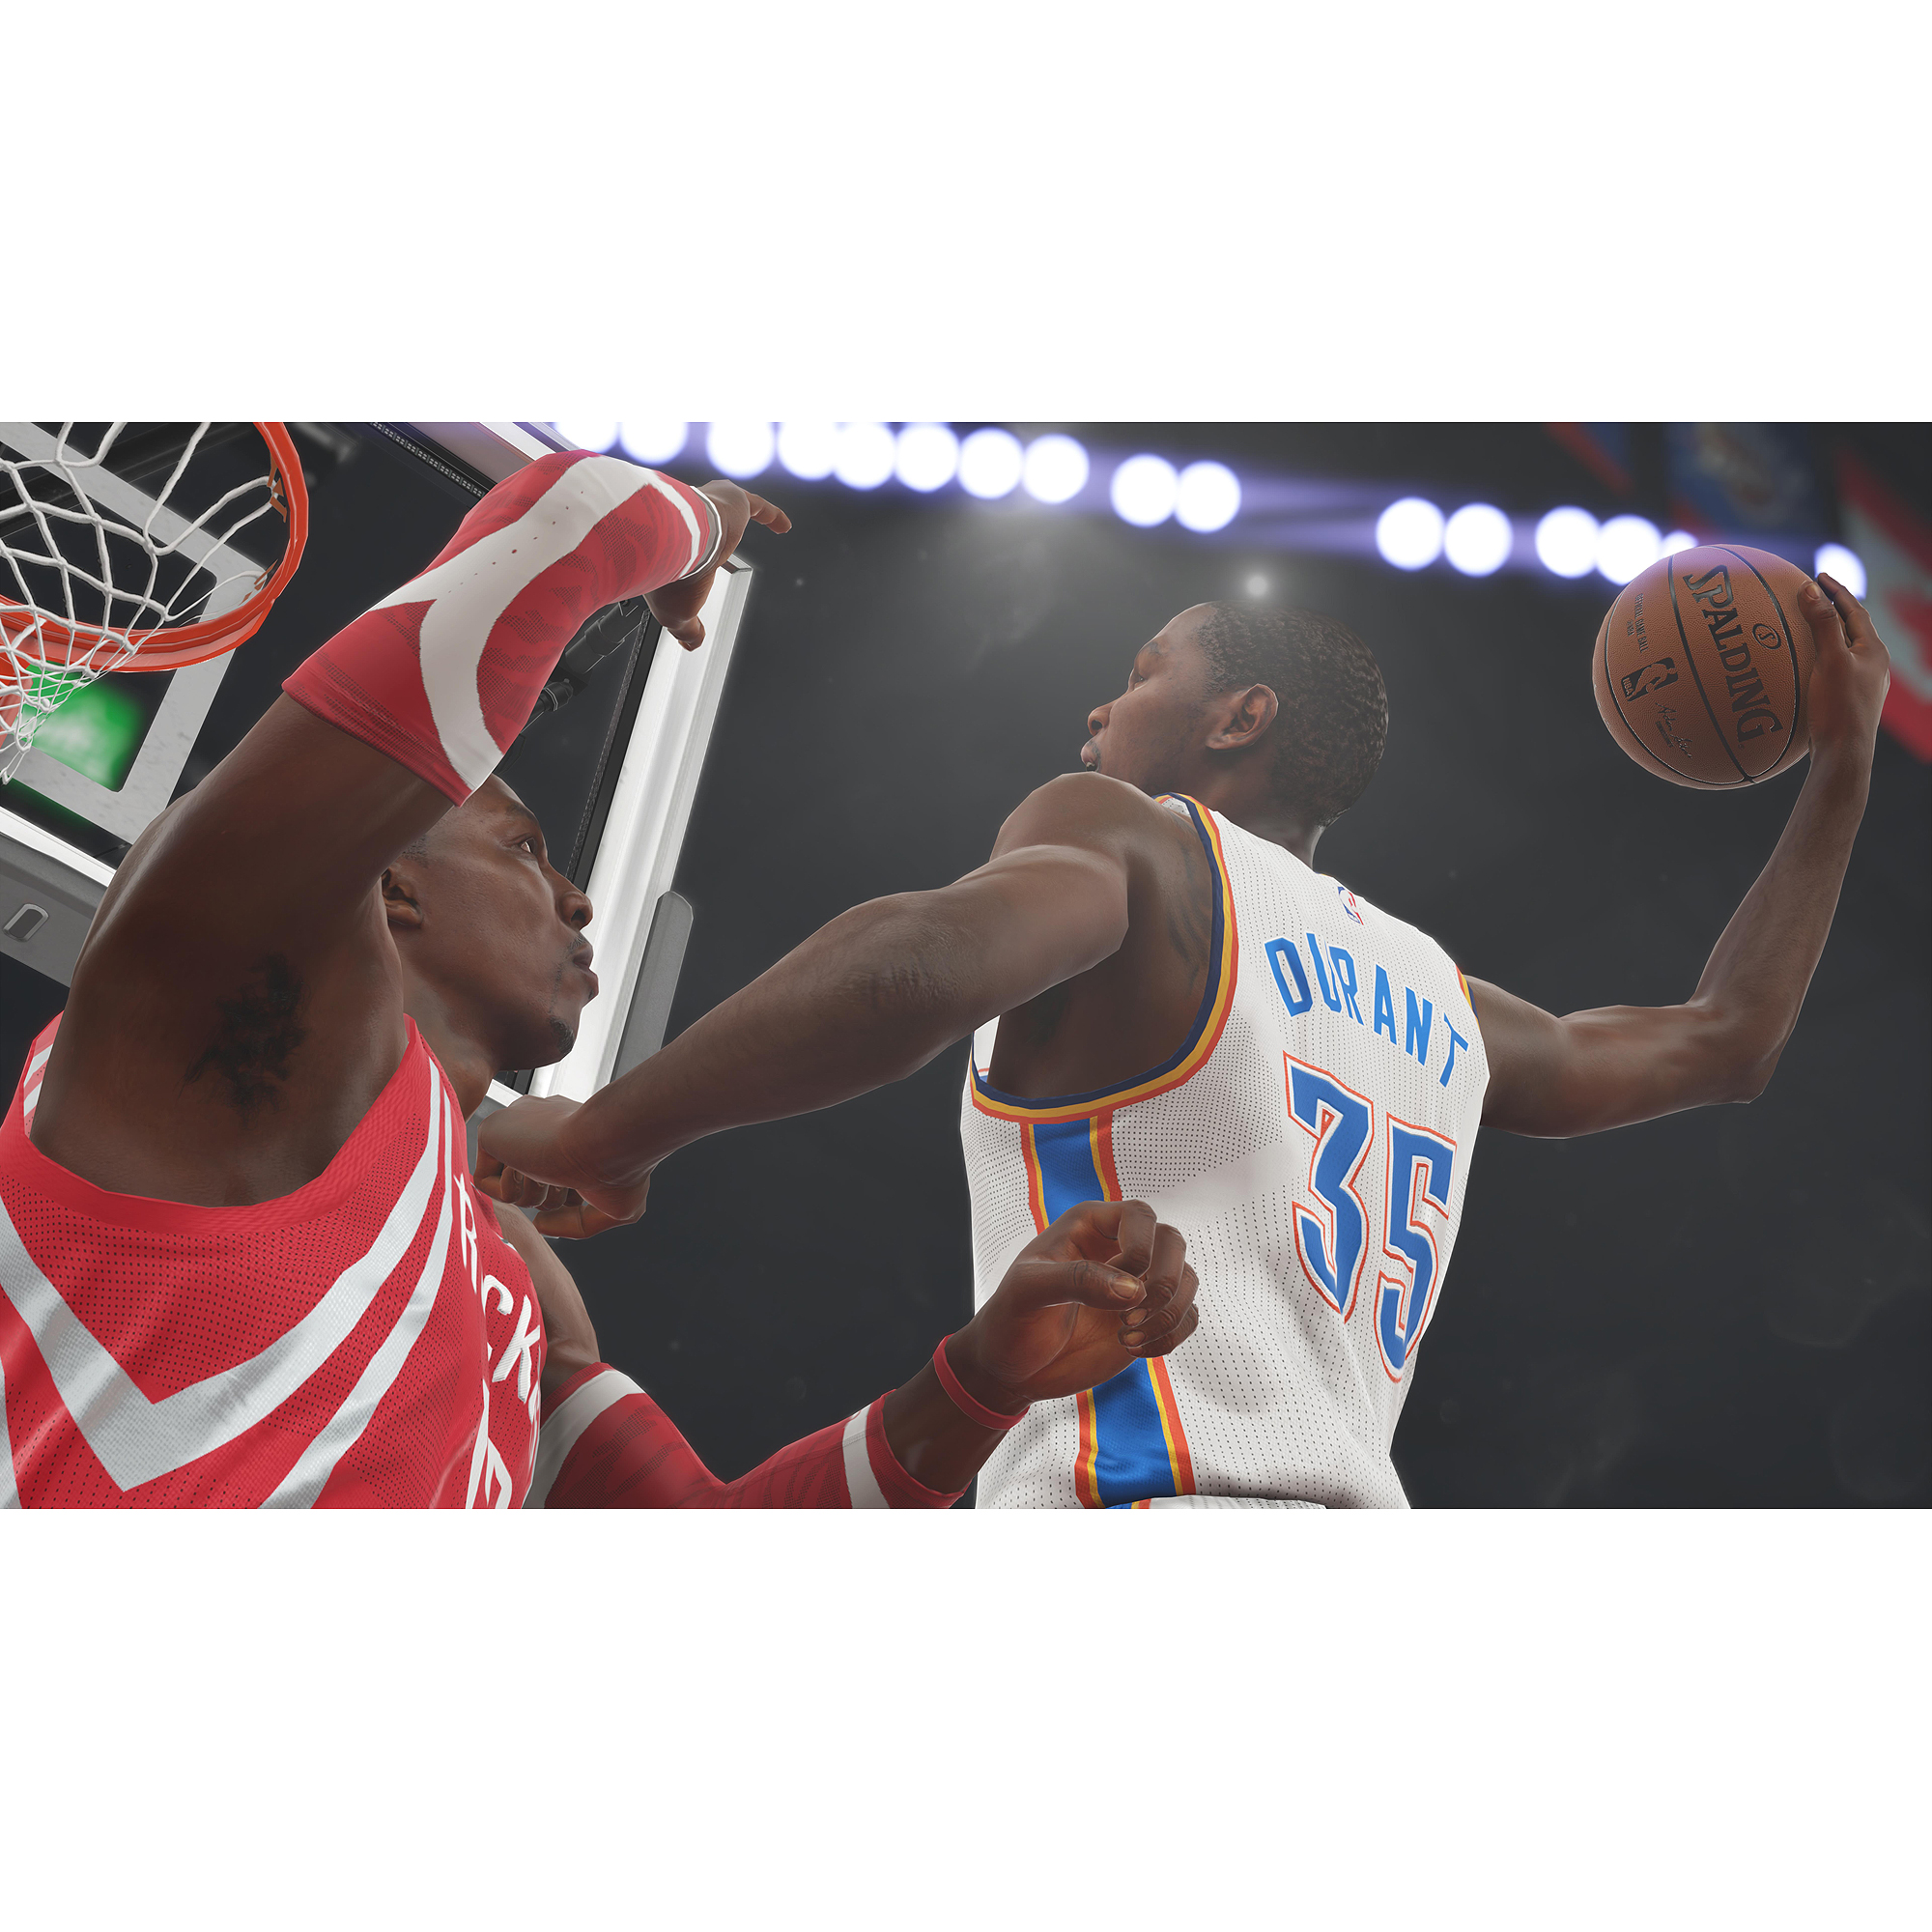 NBA 2K15 for Xbox One - image 4 of 7